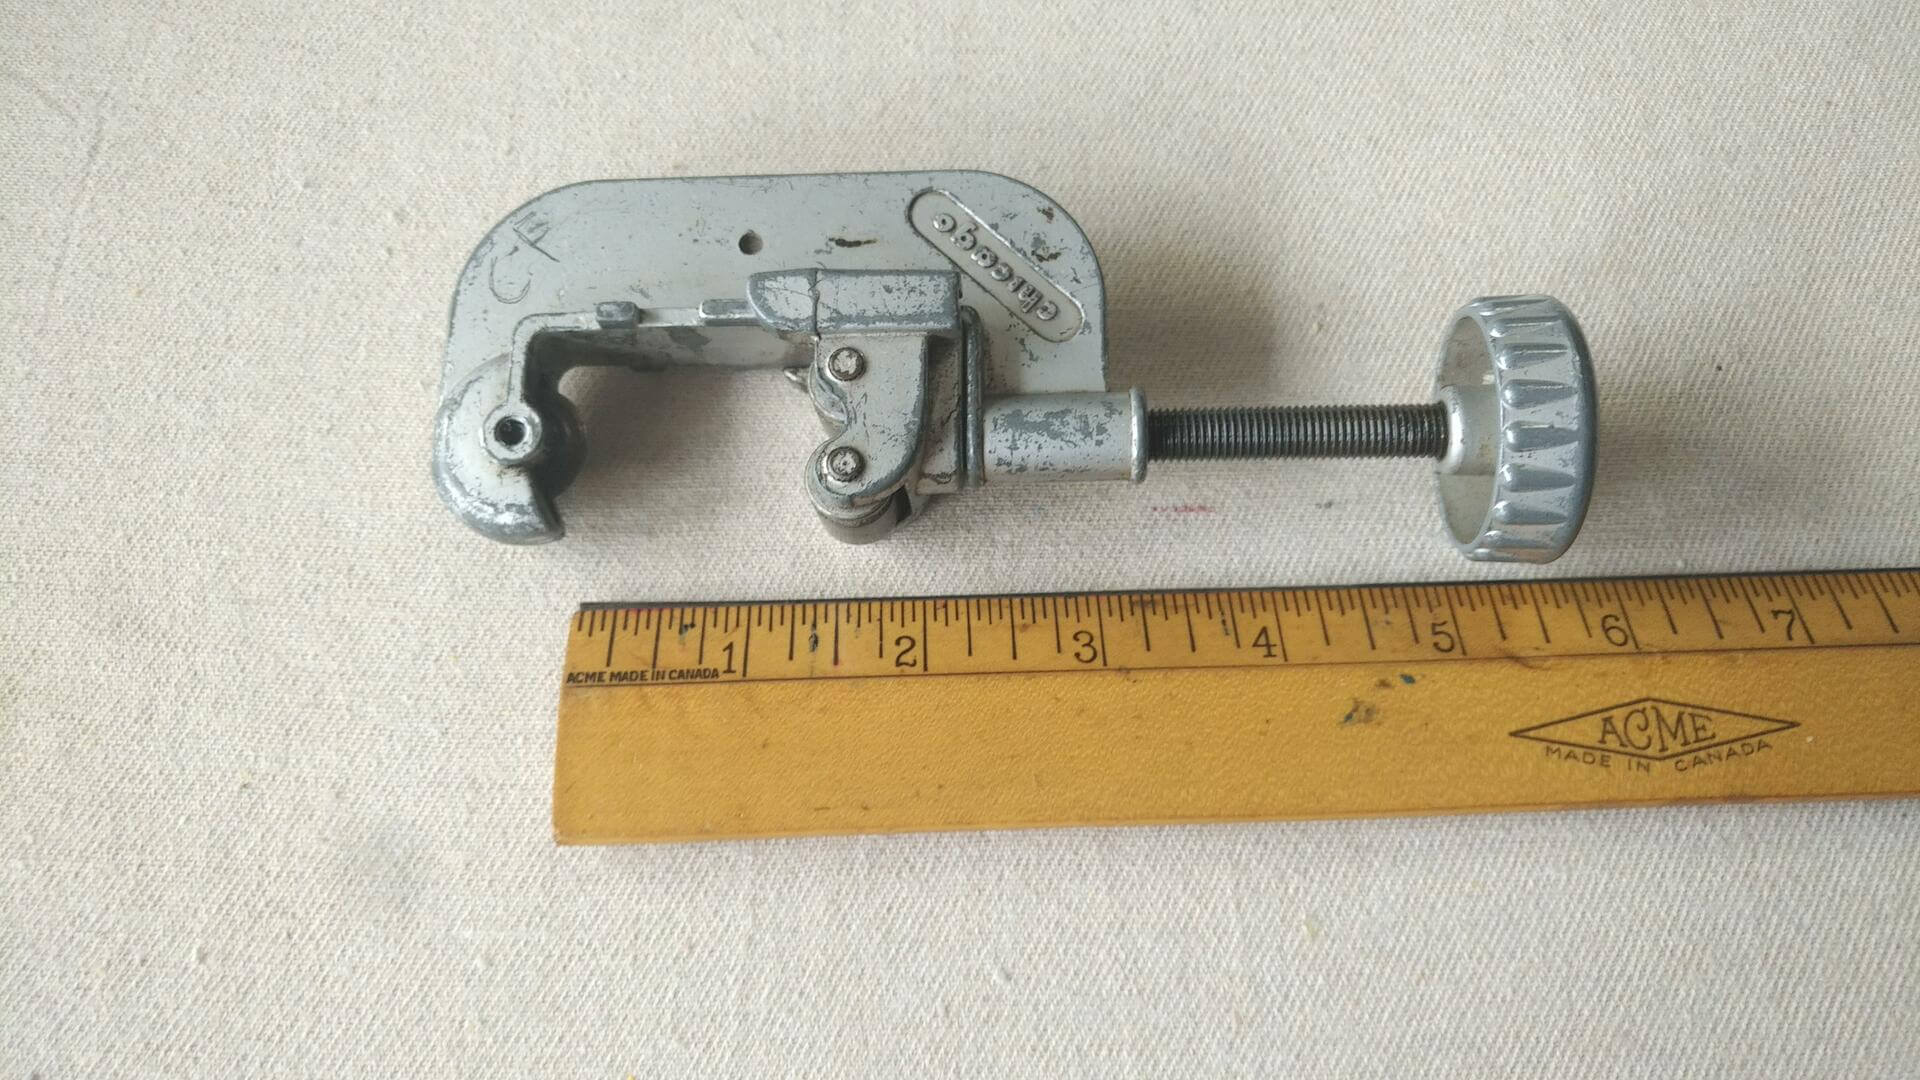 Quality cast aluminum vintage Chicago tube pipe cutter 3/16" to 1 1/8" ready to use. Antique made in USA plumbing pipe tools and cutters